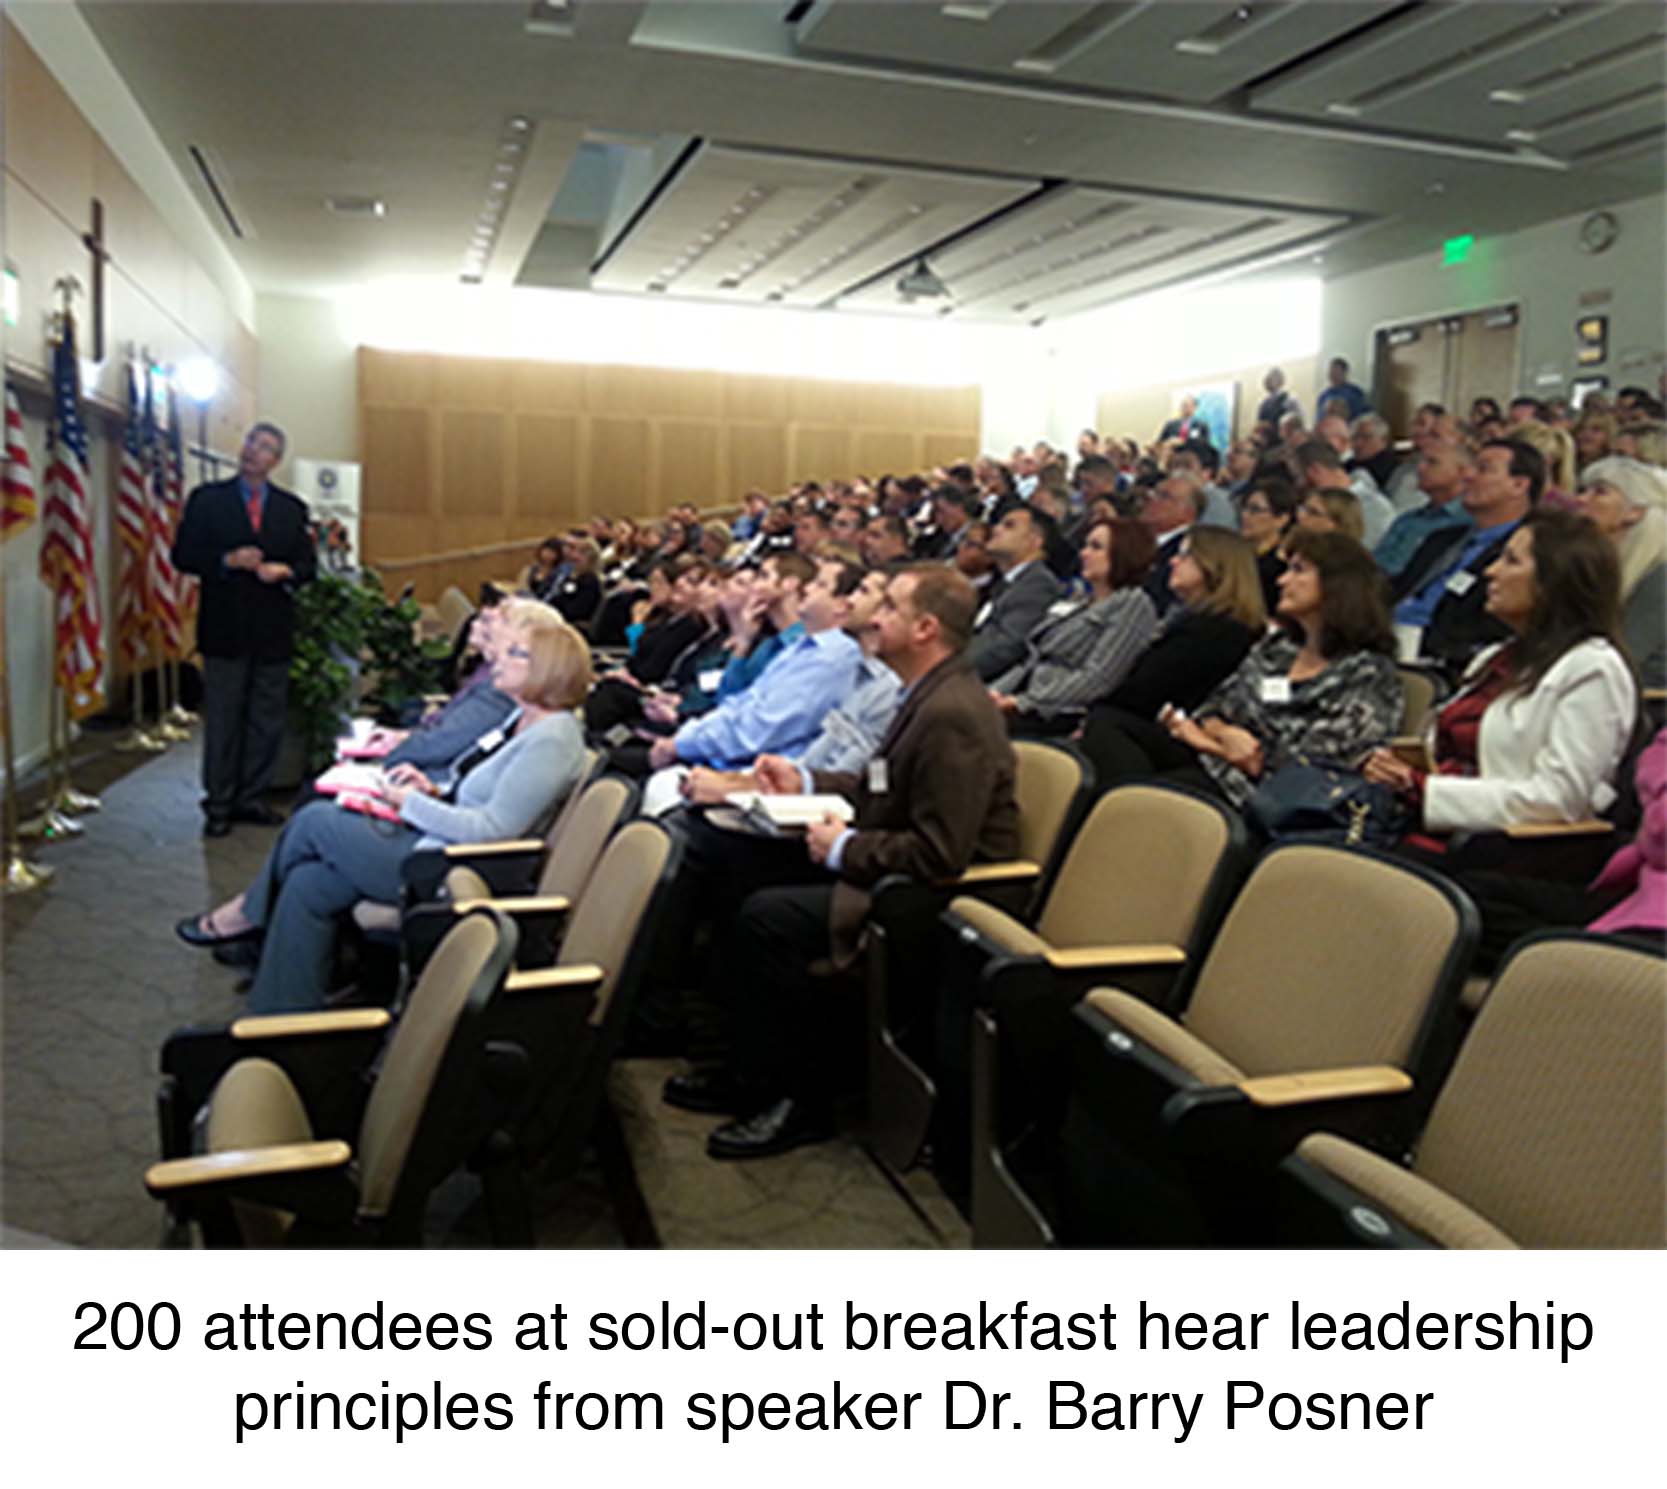 200 attendees at sold-out breakfast hear leadership principles from speaker Doctor Barry Posner